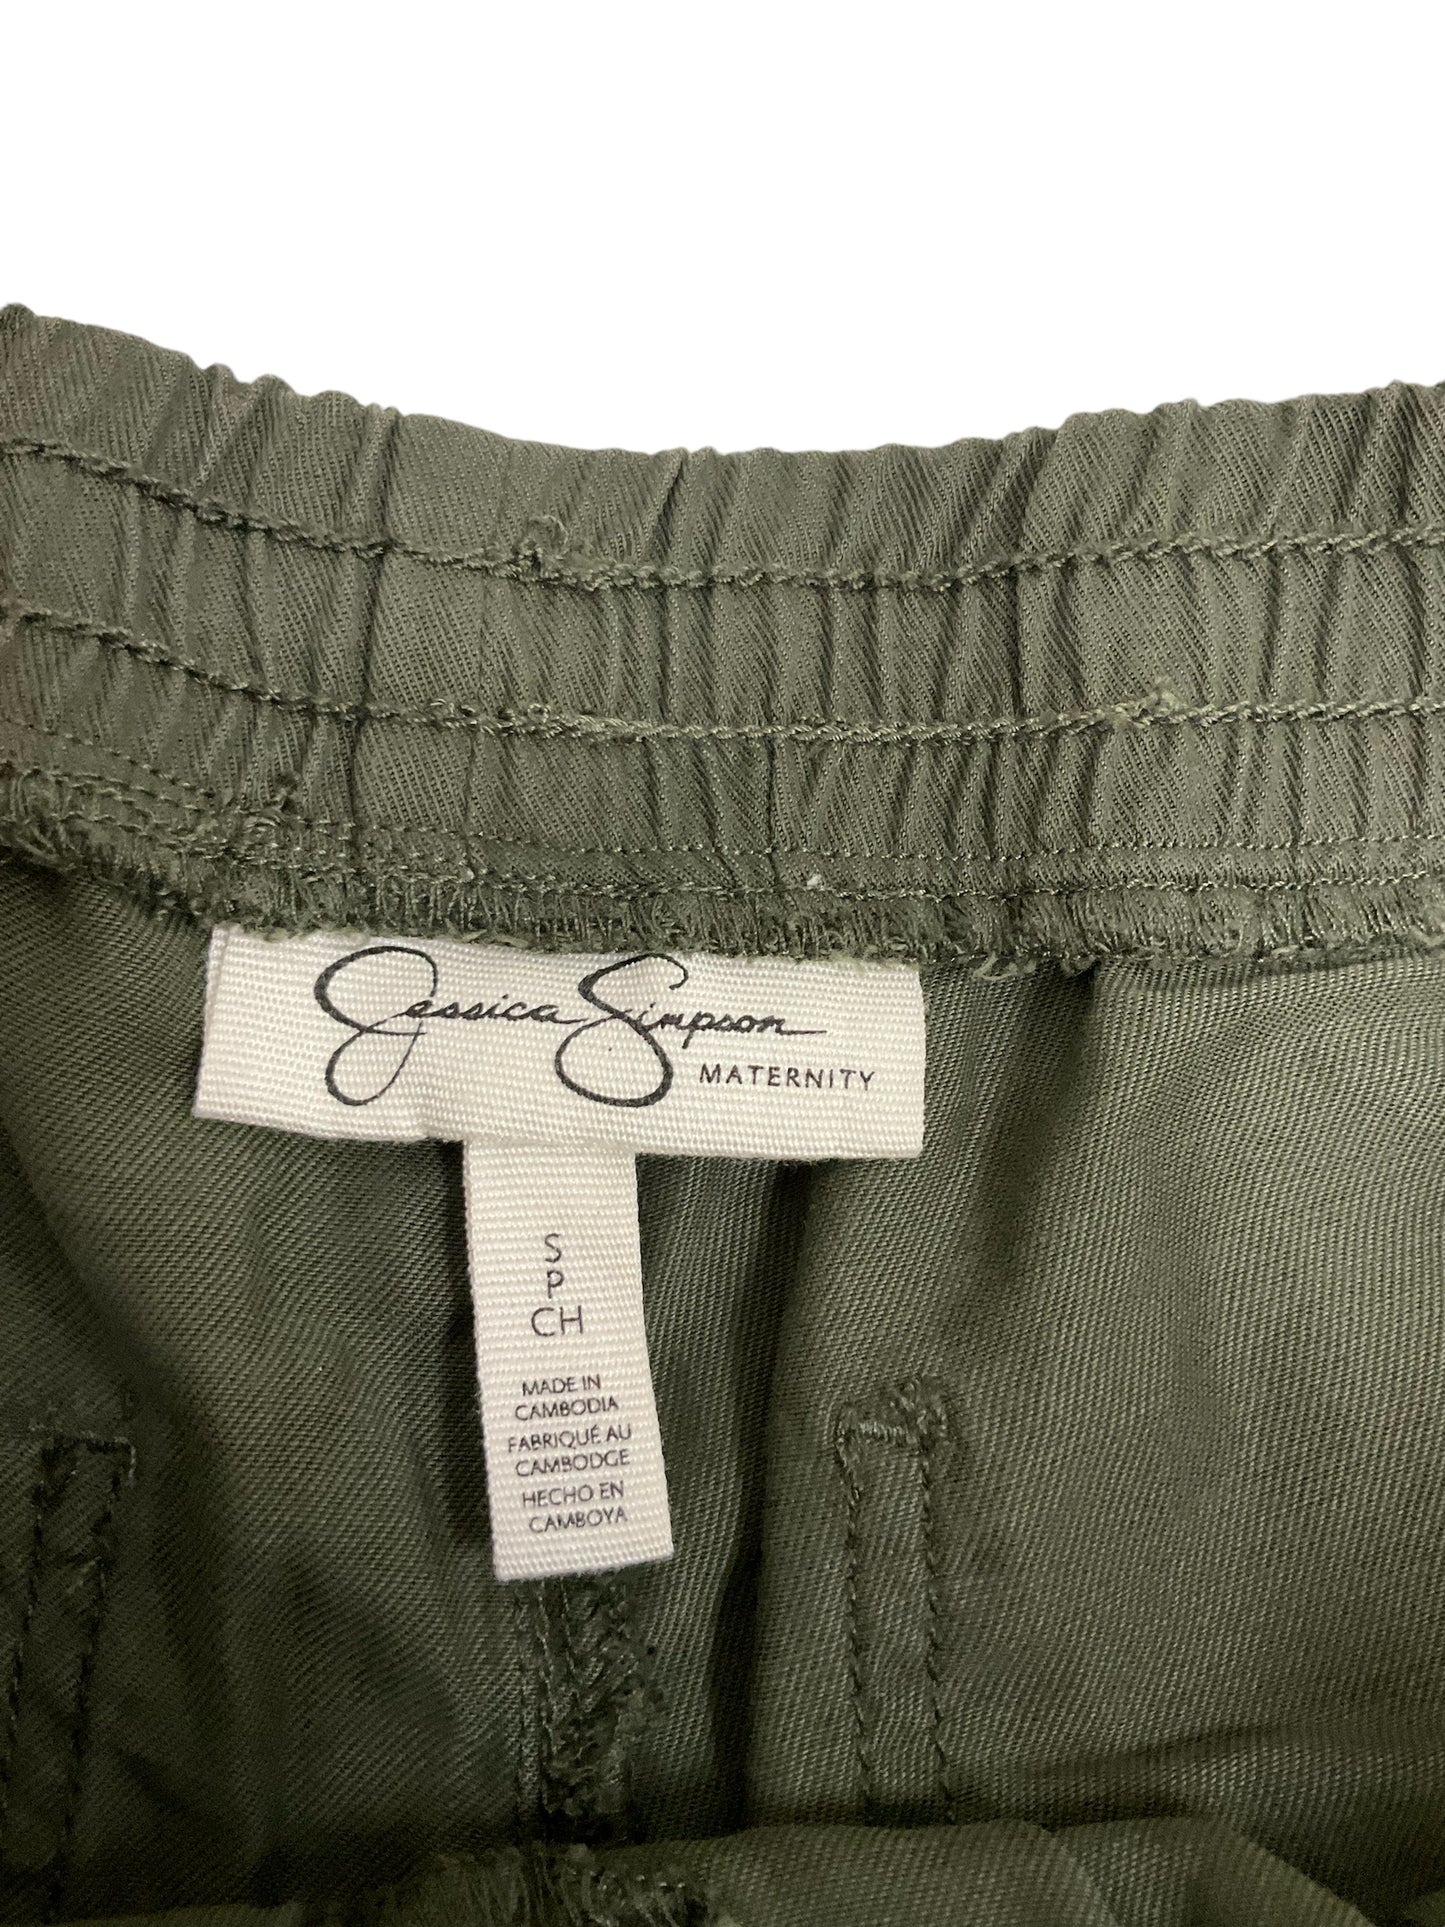 Maternity Shorts By Jessica Simpson  Size: S